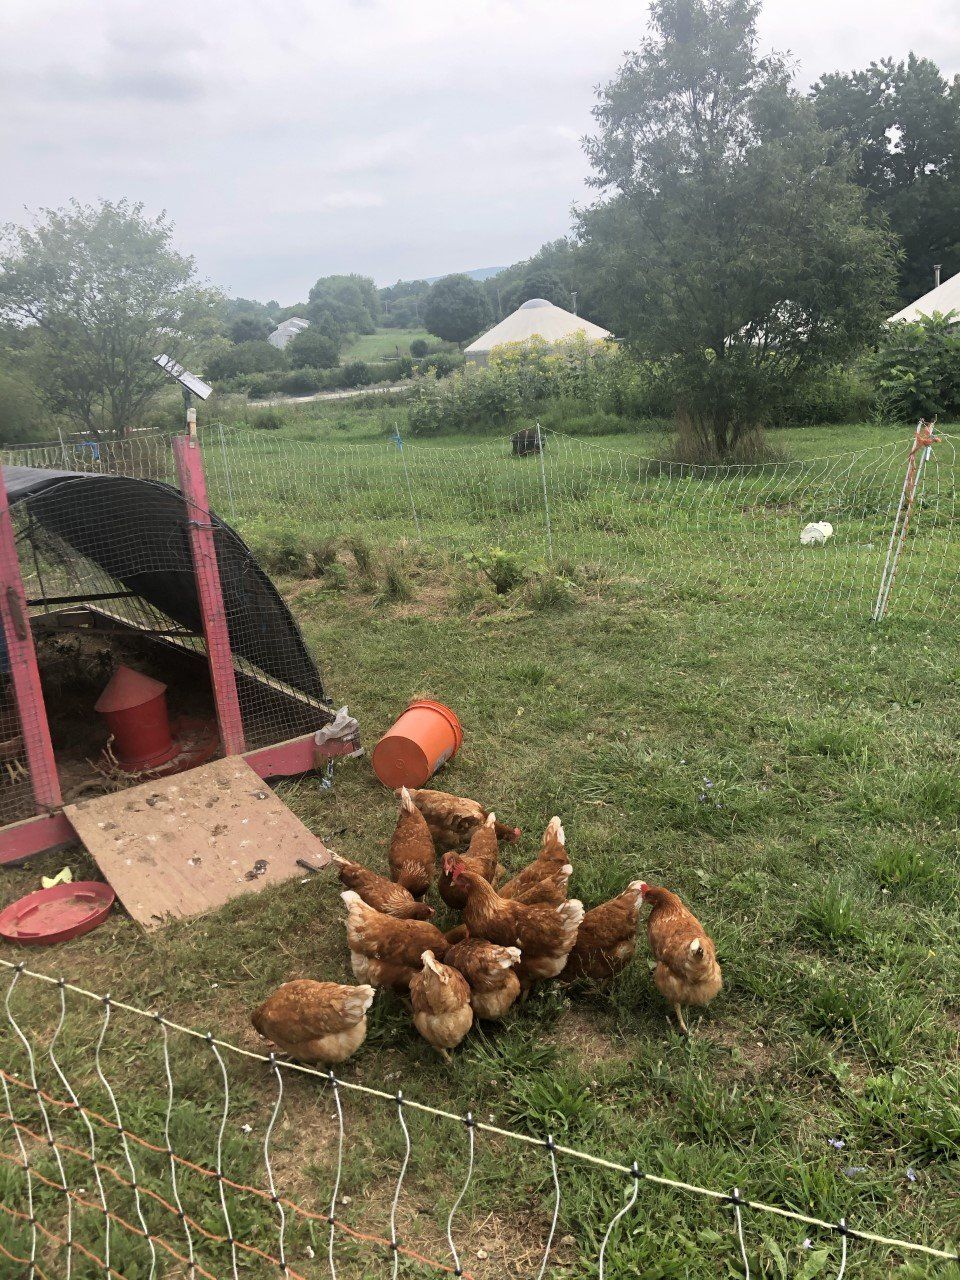 Next Happening: Farm Happenings for August 18, 2020